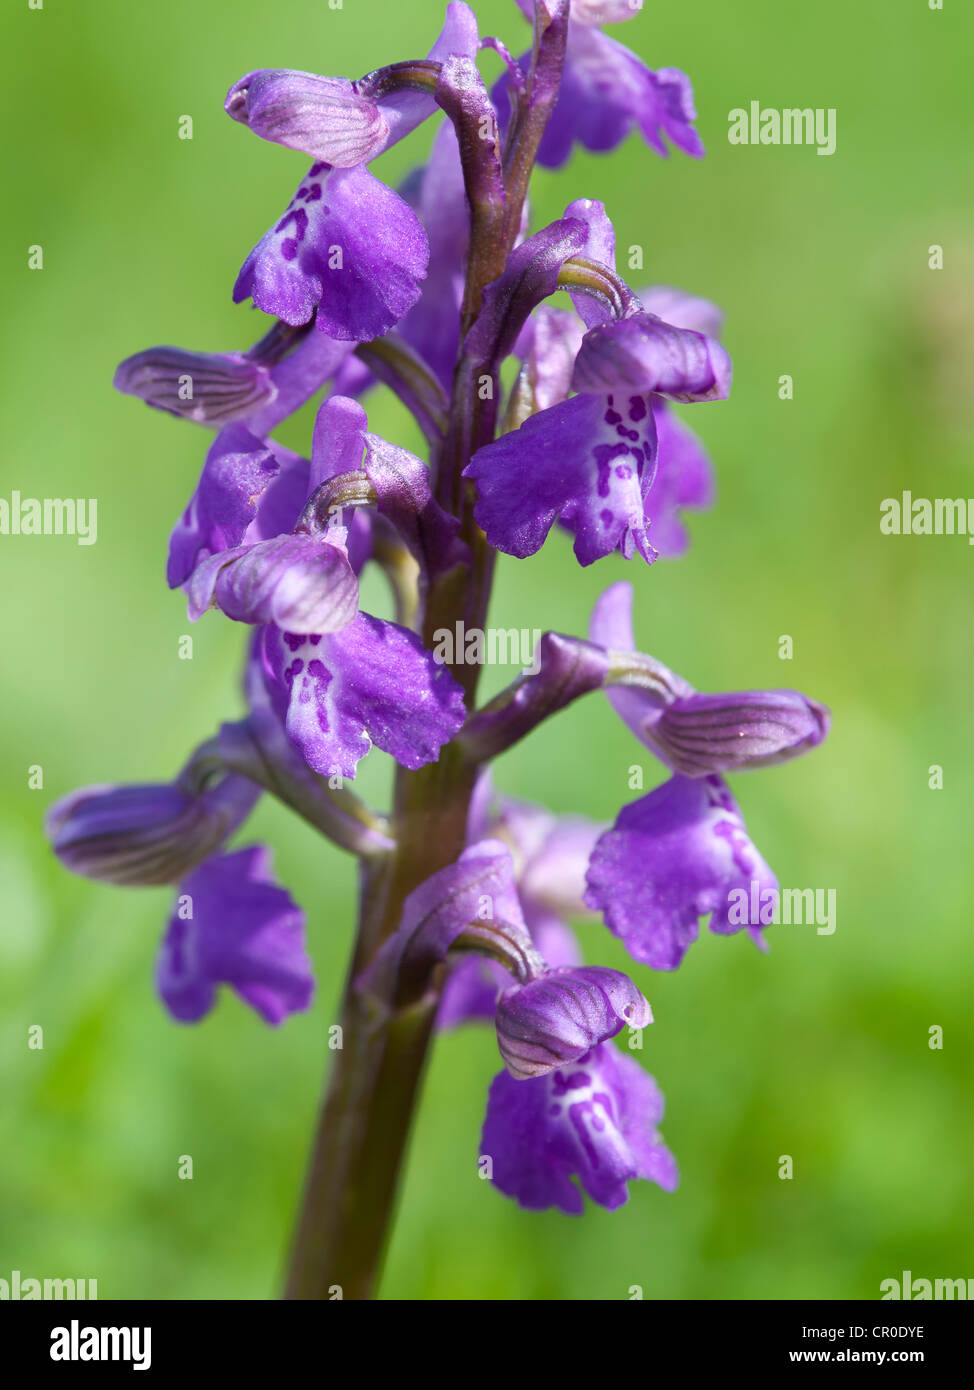 A single spike of the Green - winged Orchid ( Orchis morio ) Stock Photo